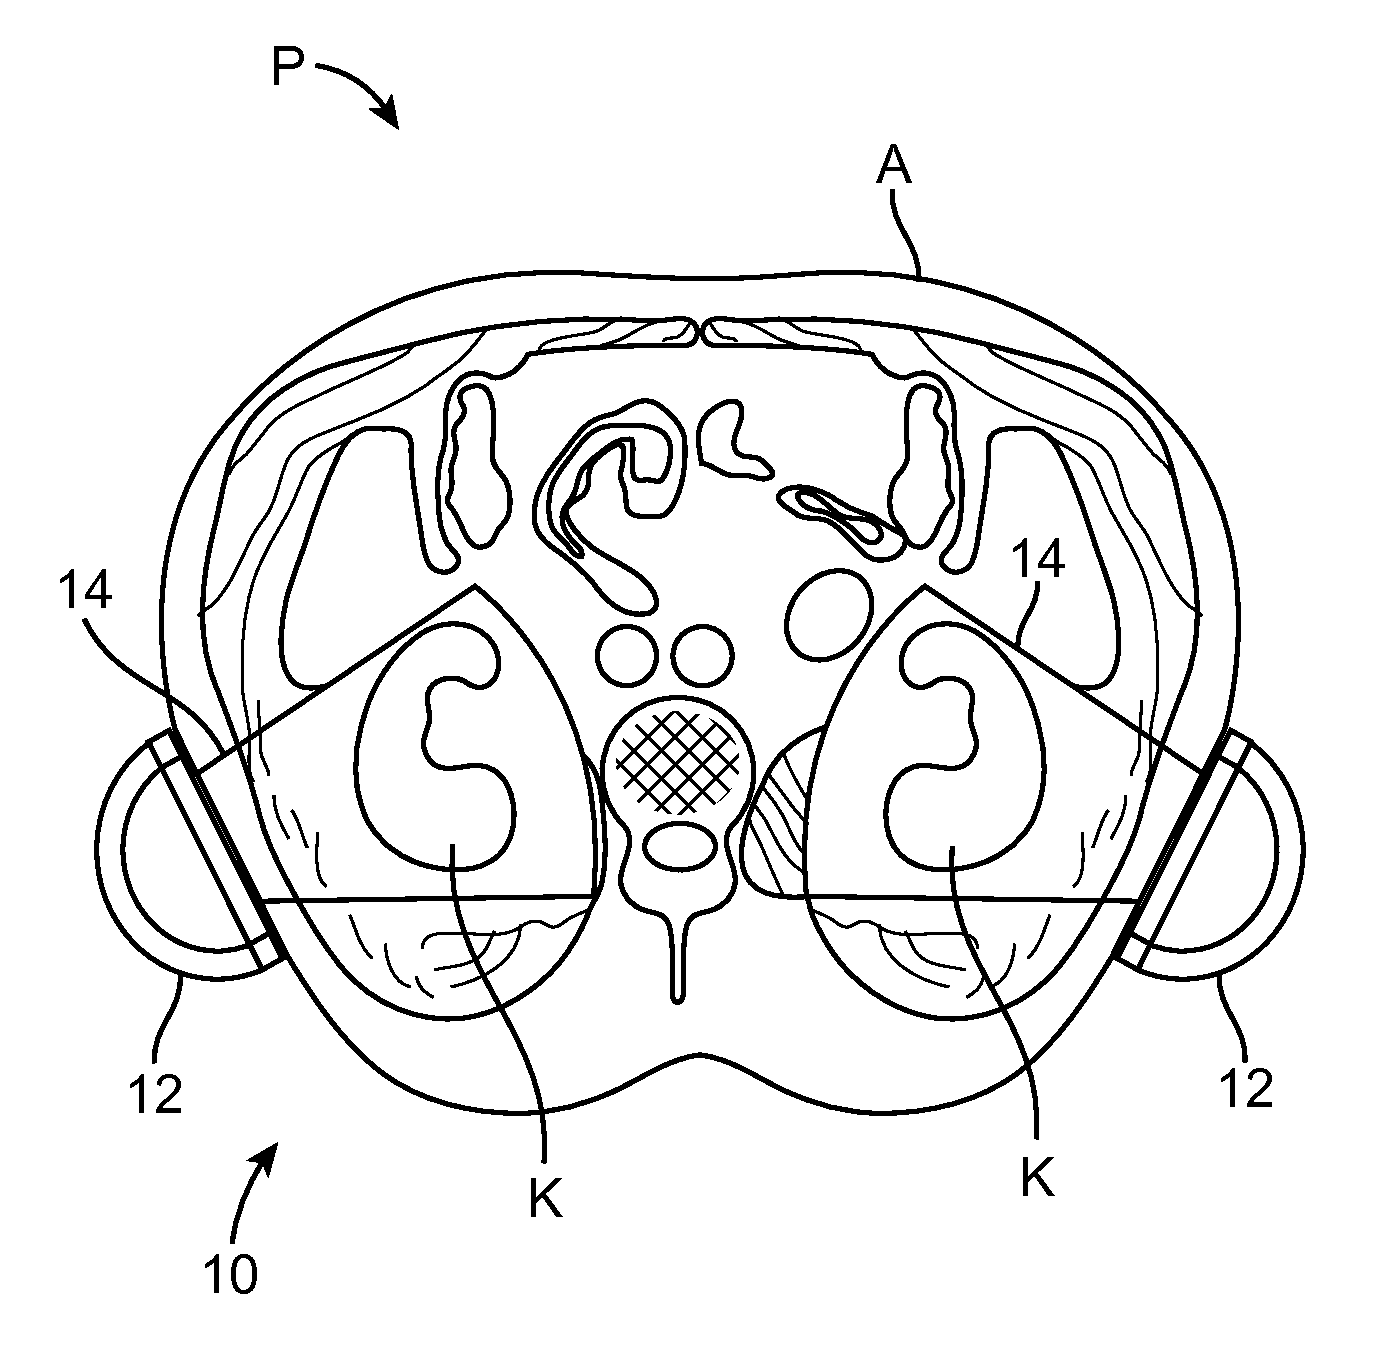 Renal Injury Inhibiting Devices, Systems, and Methods Employing Low-Frequency Ultrasound or Other Cyclical Pressure Energies